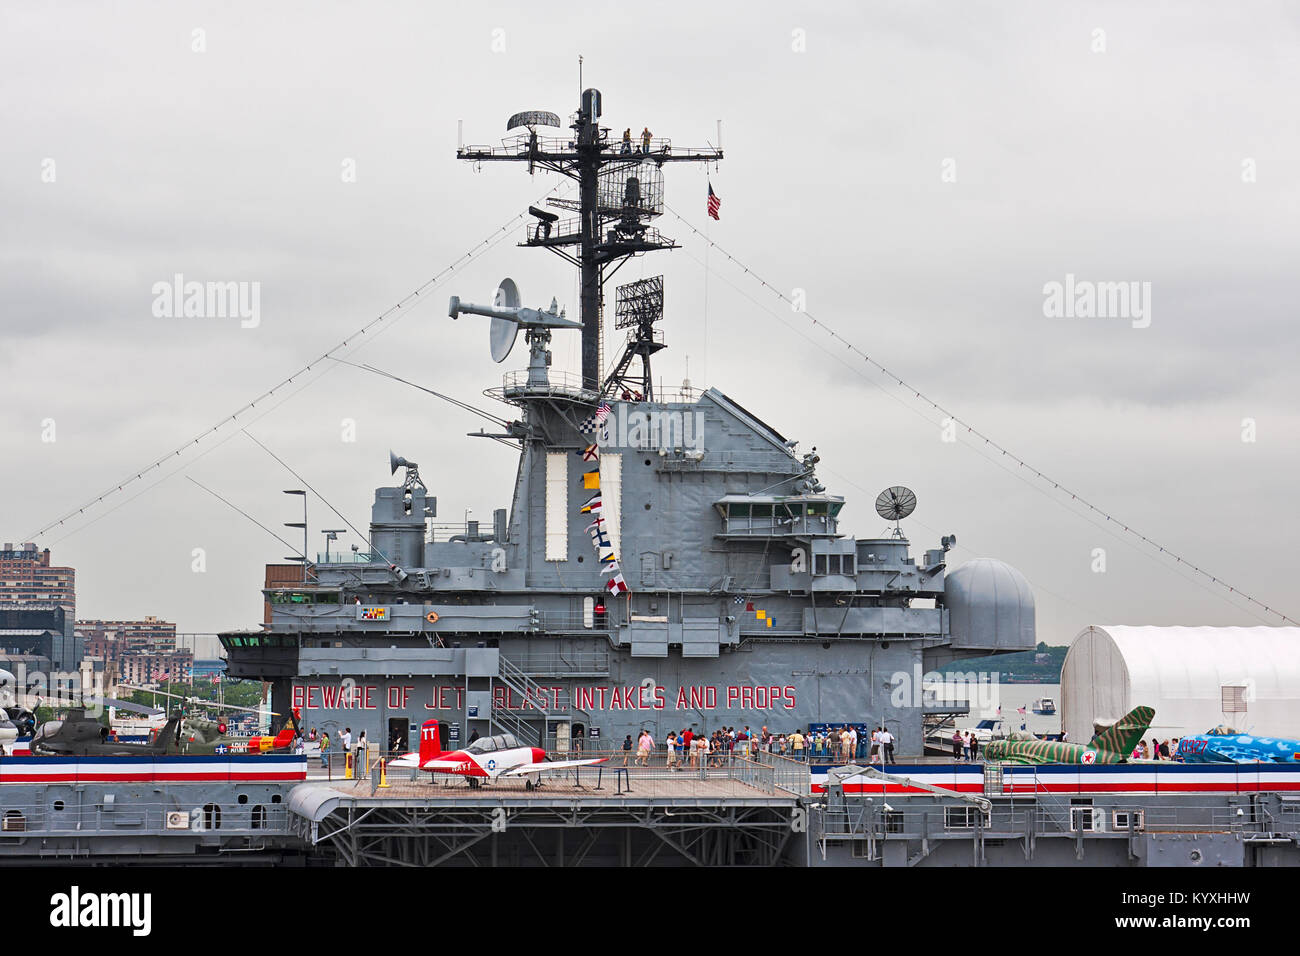 The USS Intrepid navy aircraft carrier at the Intrepid Sea-Air-Space Museum in Manhattan, New York City. Stock Photo